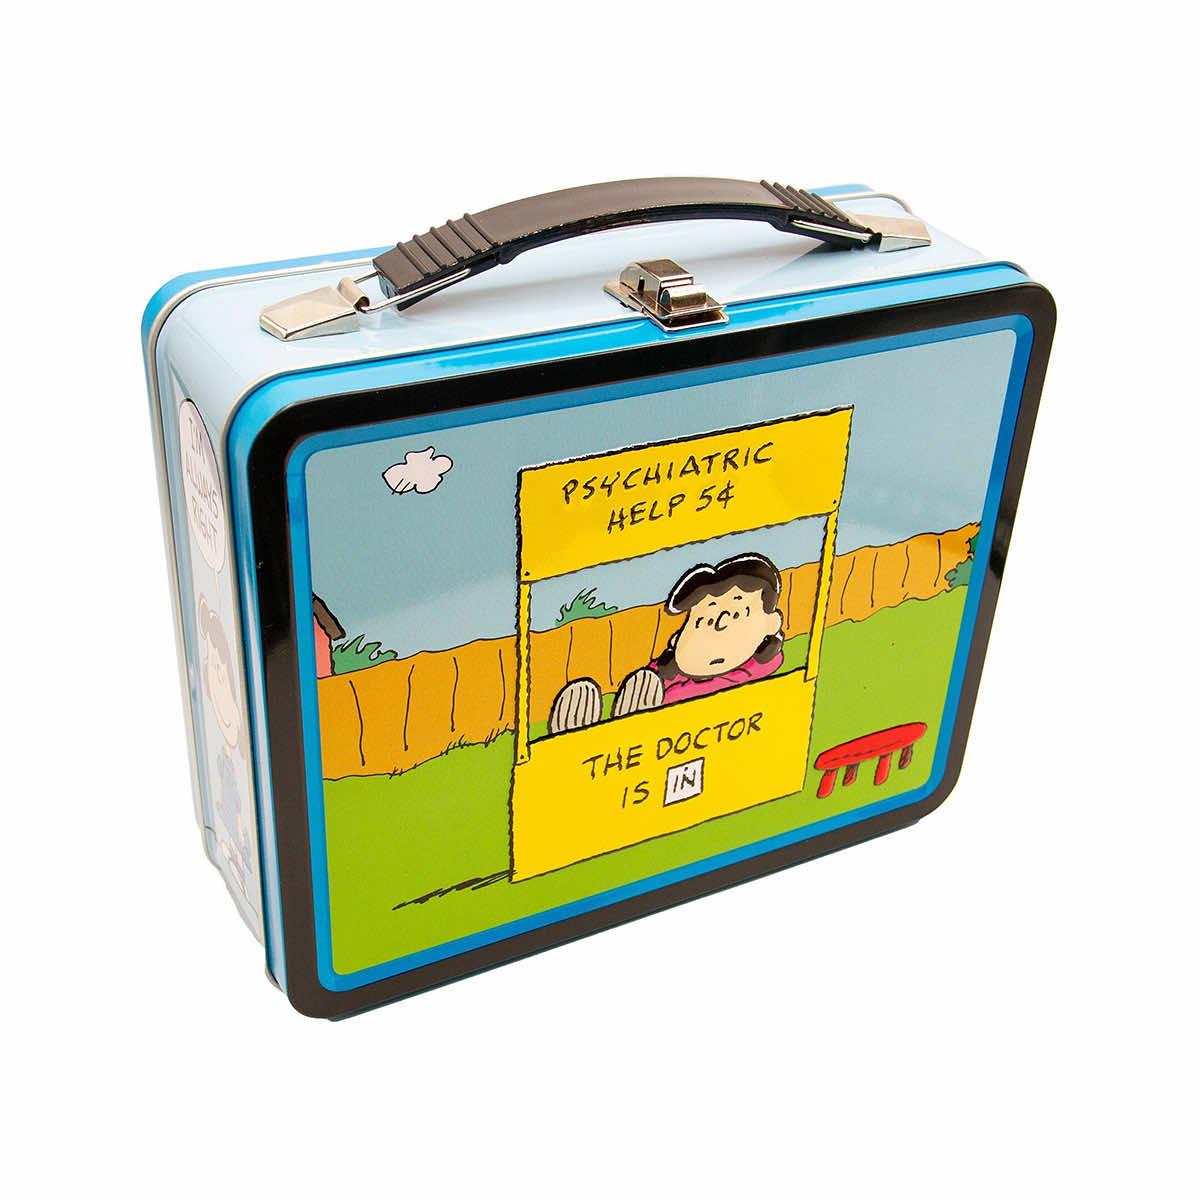 Bluey Lunchbox Tin With Puzzle and Toy Figure Bluey Bluey Toys Bluey Dog  Lunchbox Tins Puzzles Toys Gift 